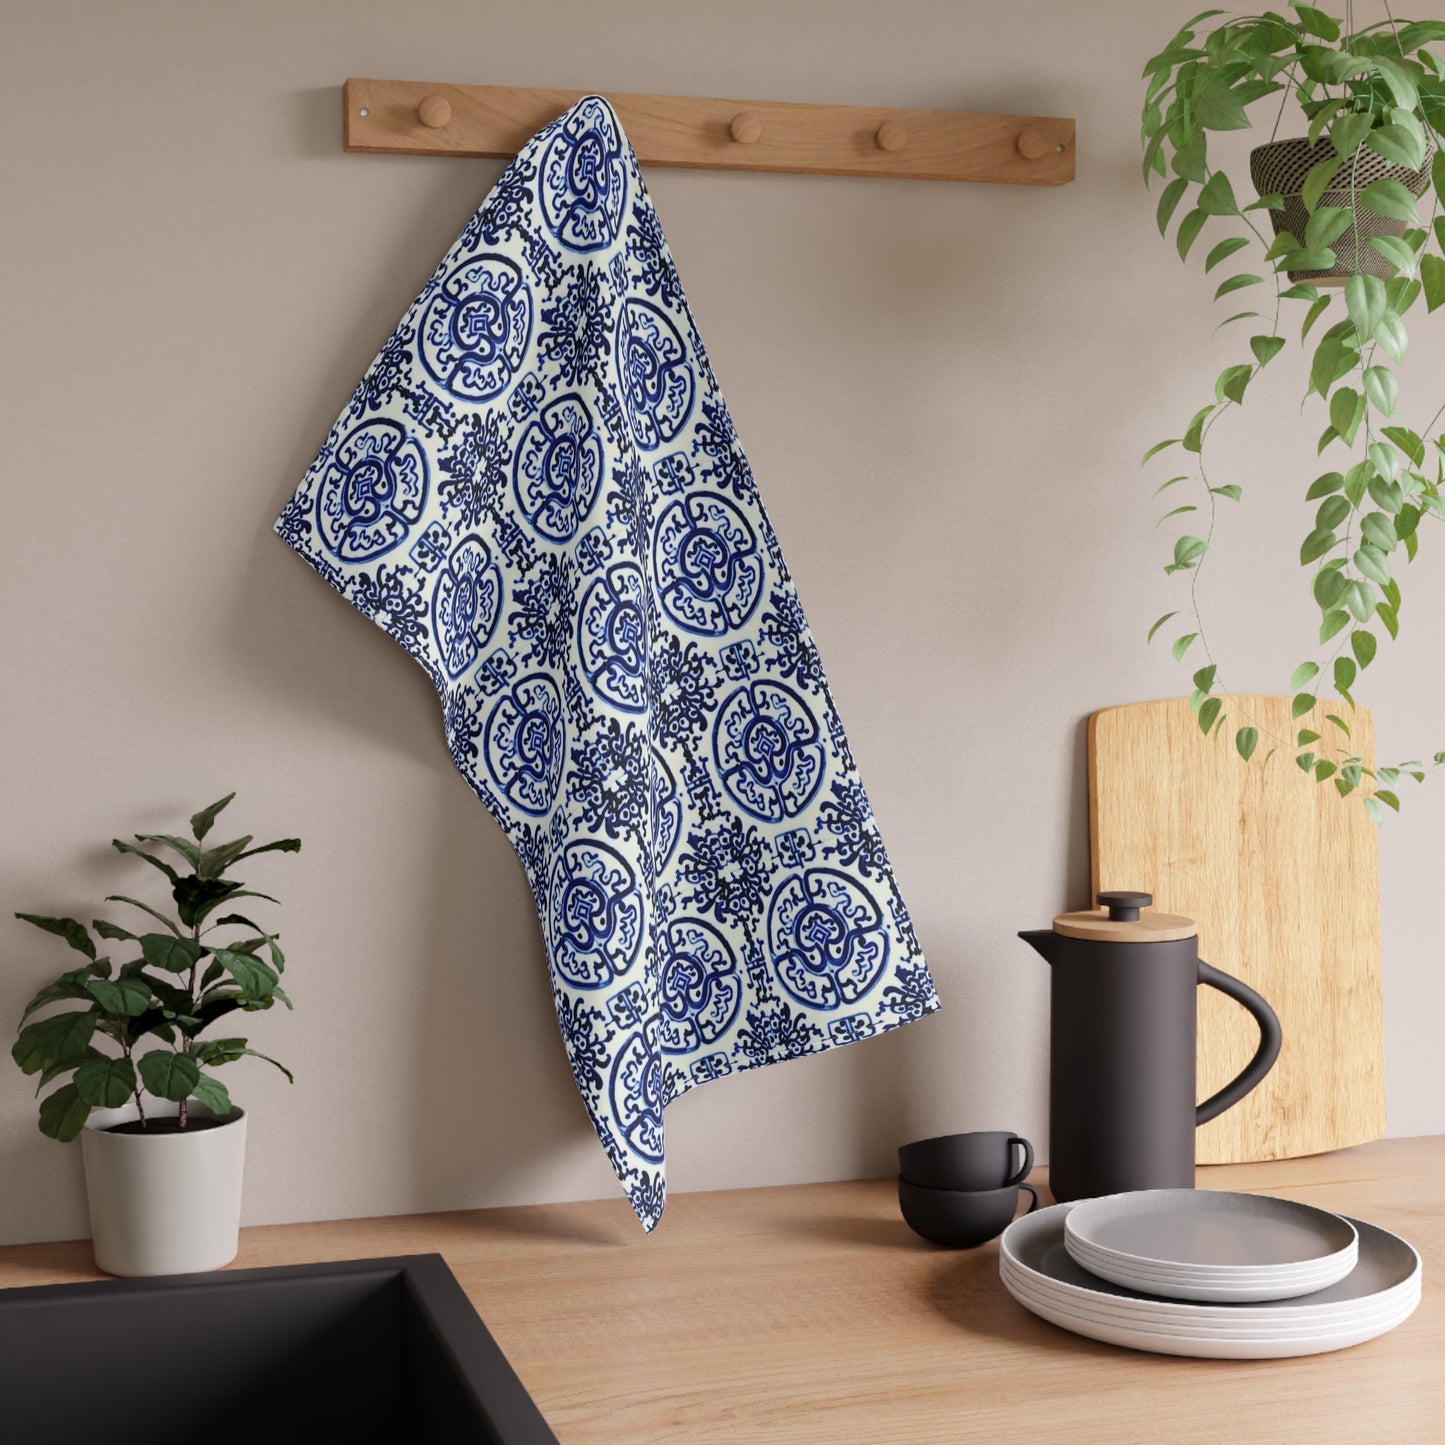 Chinese Symbol Decorative Pattern Ming Dynasty Blue and White Decorative Kitchen Tea Towel/Bar Towel